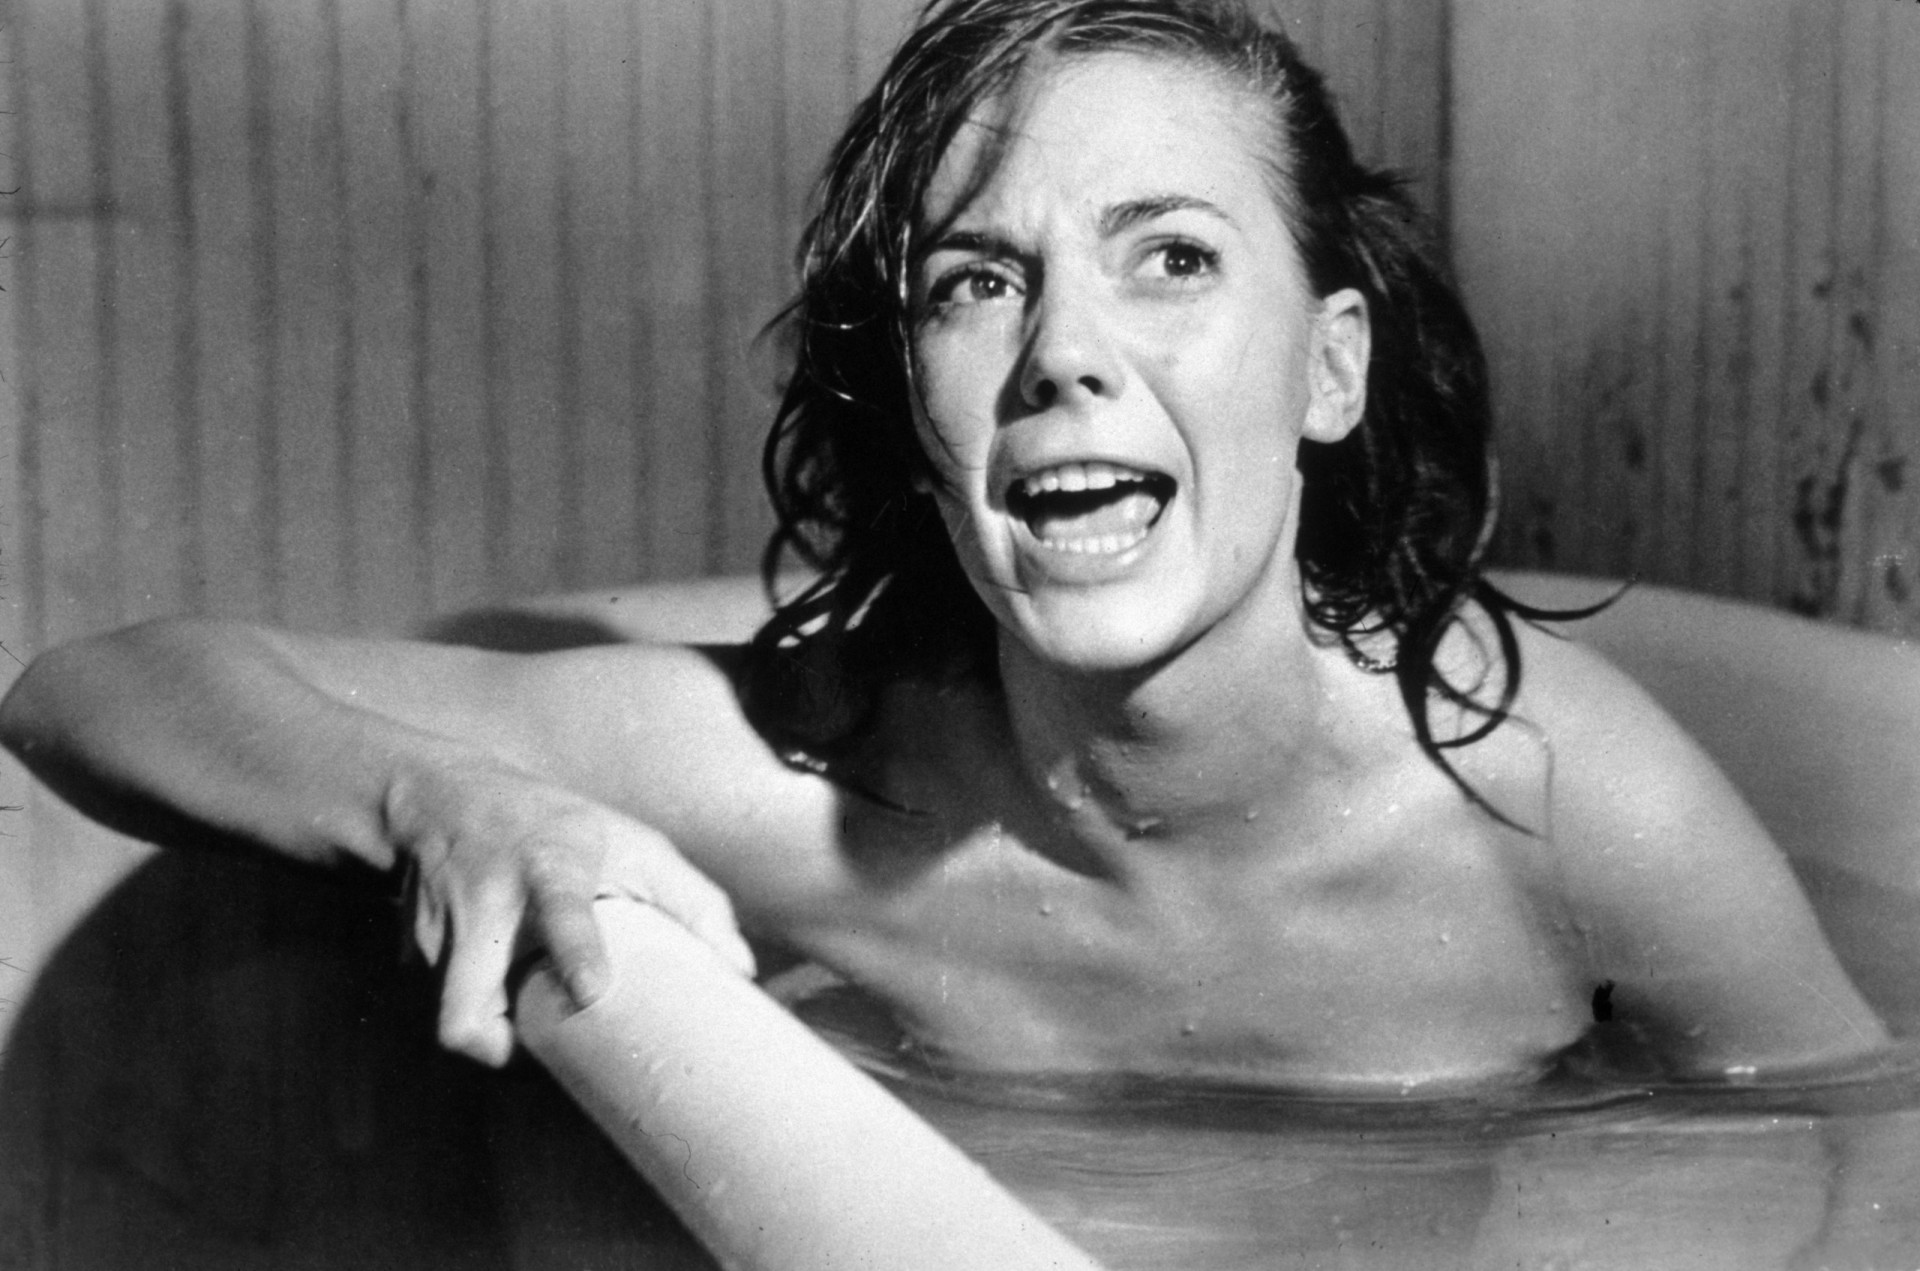 <p>In the most emotionally raw sequences in 'Splendor in the Grass,' Natalie Wood's character "Deanie" is lolling in the tub when an argument ensues between her and her mother. The verbal exchange soon verges on the hysterical, with Deanie screaming and shrieking and practically in tears.</p><p>You may also like:<a href="https://www.starsinsider.com/n/391126?utm_source=msn.com&utm_medium=display&utm_campaign=referral_description&utm_content=546036en-en"> The most shockingly honest celebrity responses </a></p>